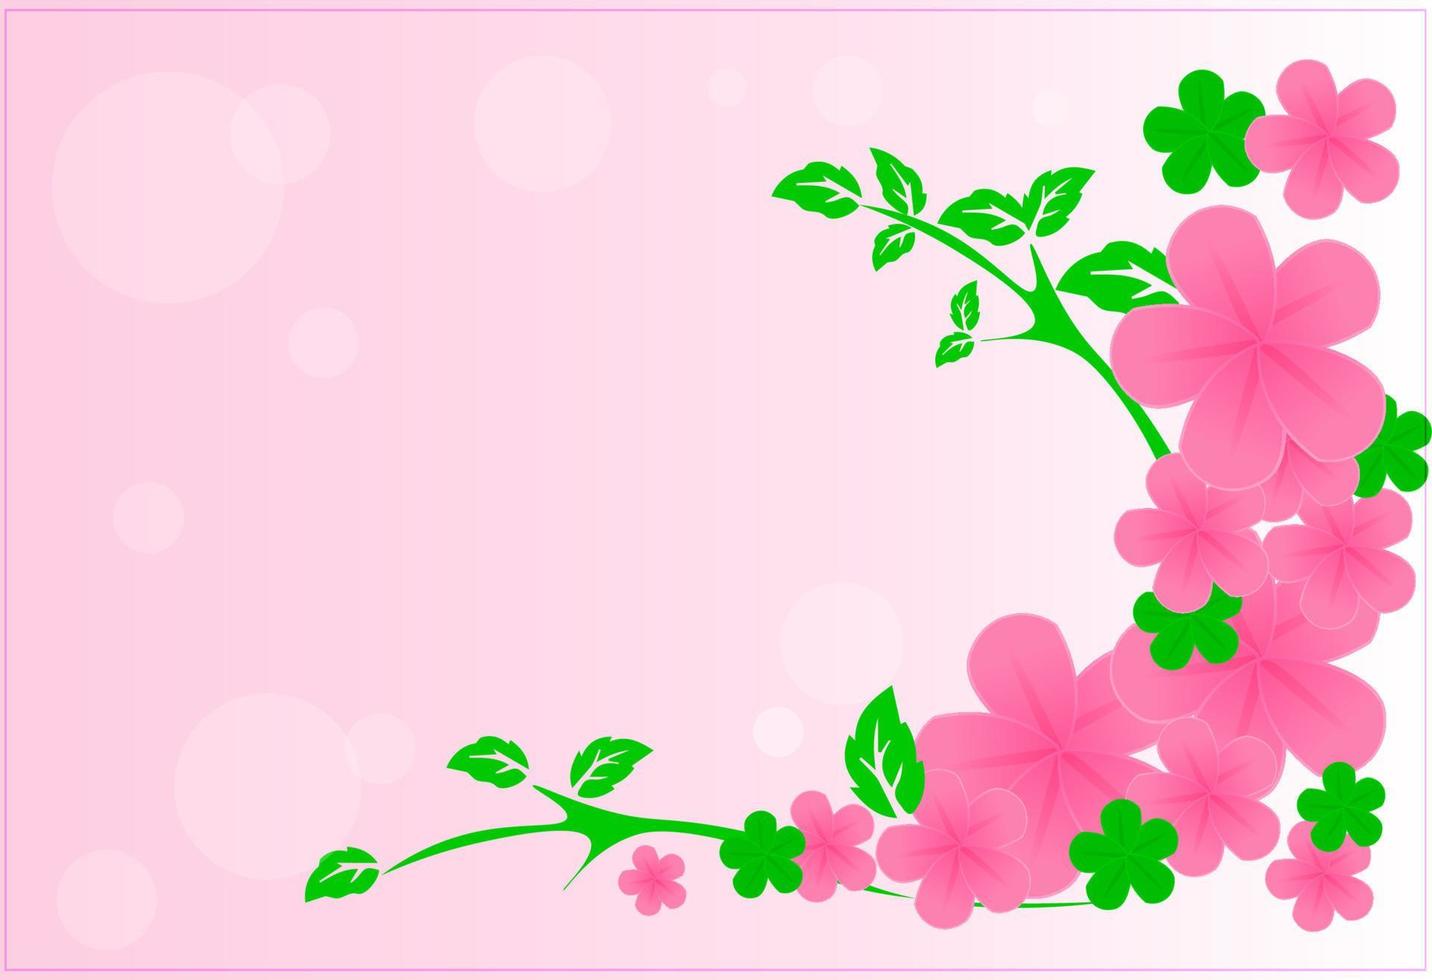 Green leaves and pink flowers Frame art on pink paper background vector